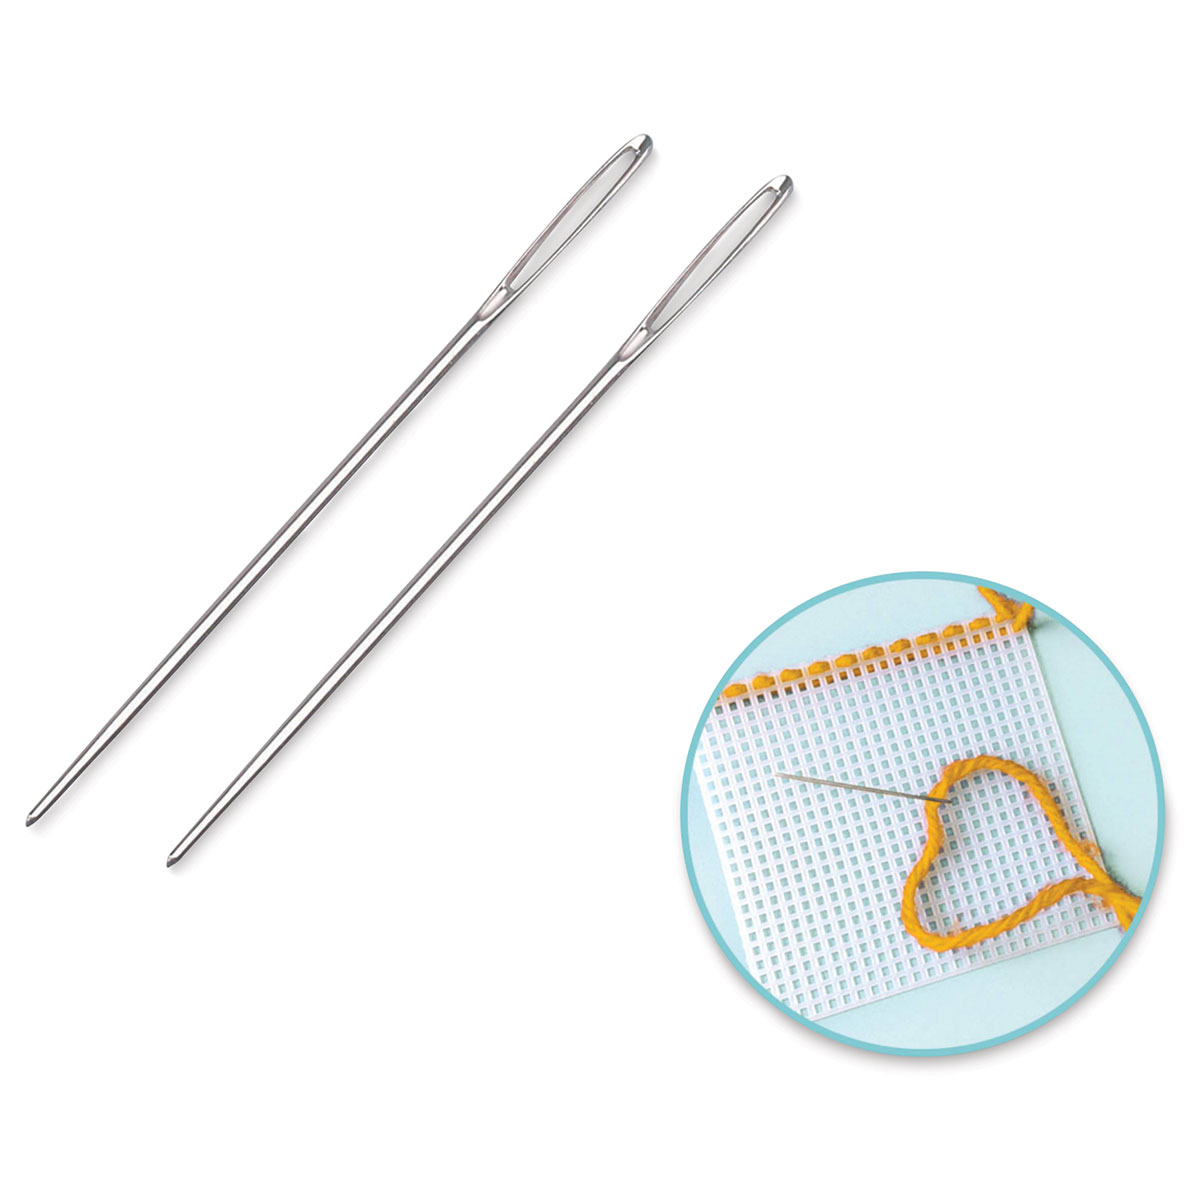 Needle Crafters Plastic Canvas Needles